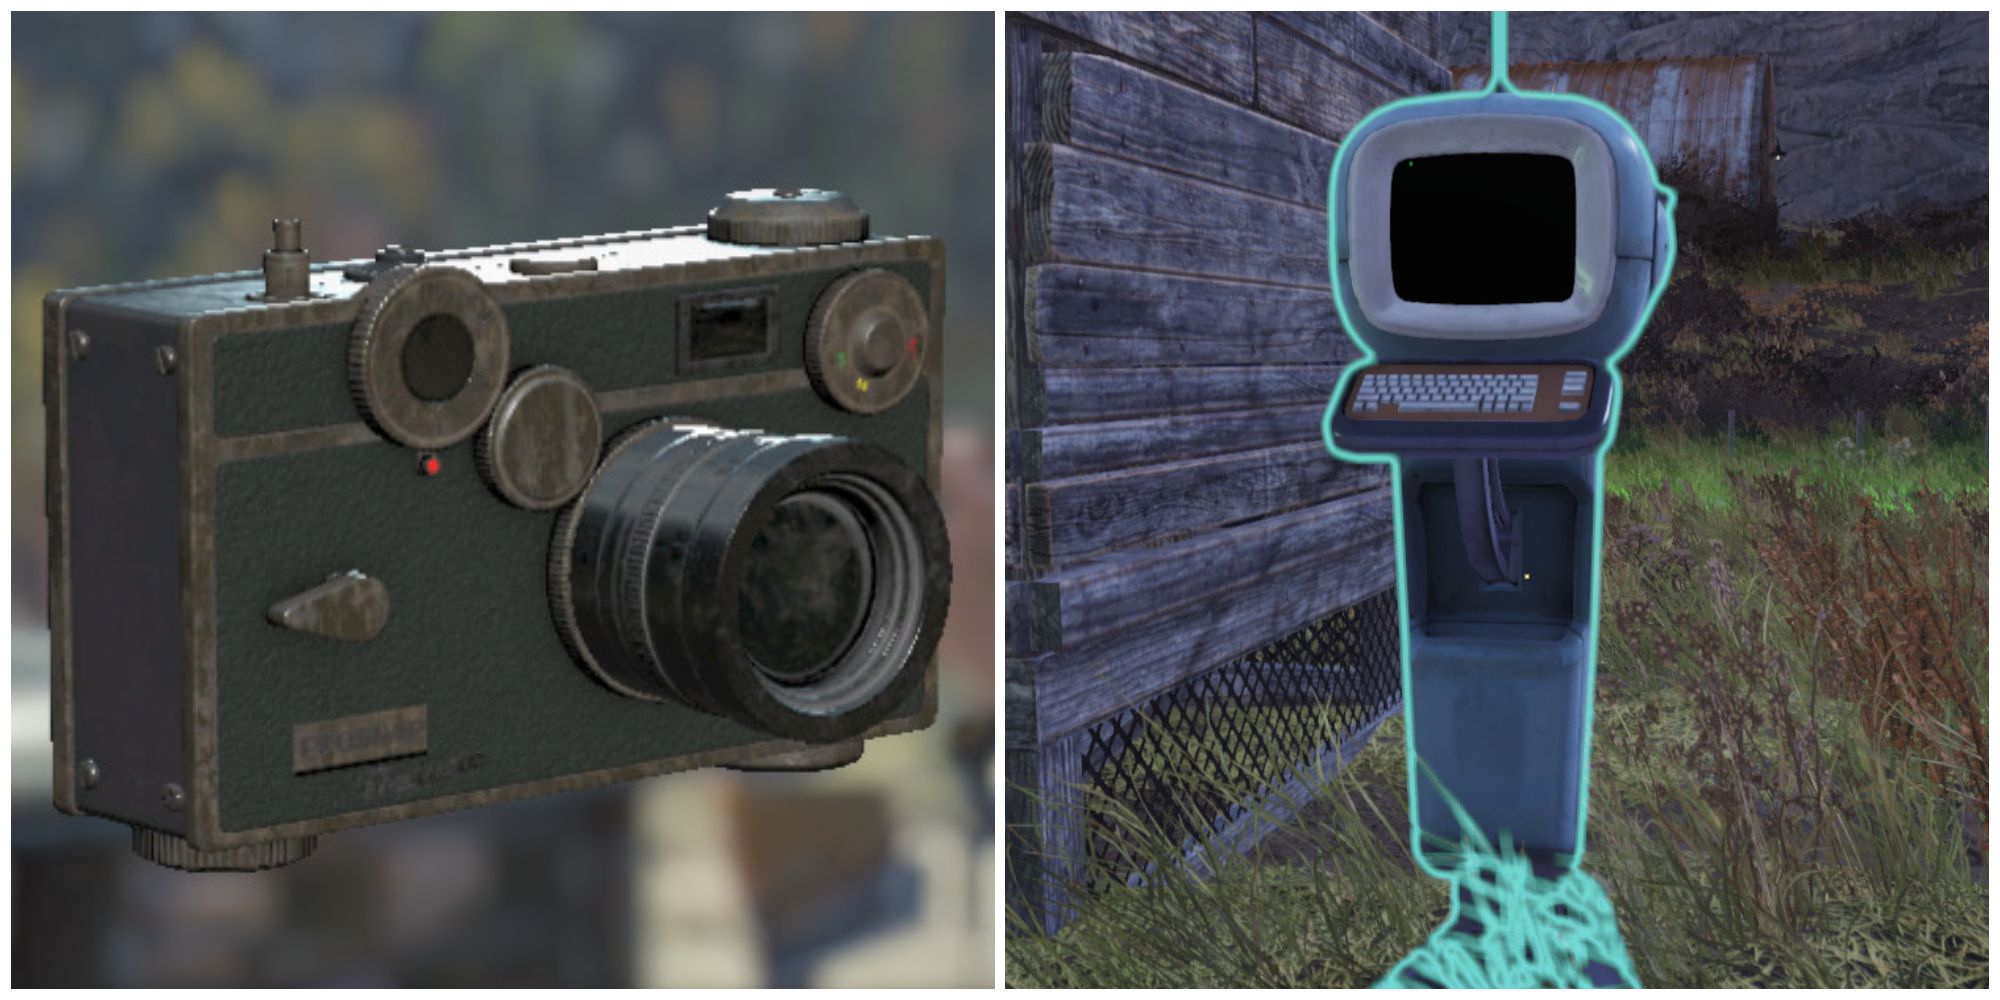 Split image of a camera and a personal terminal in Fallout 76